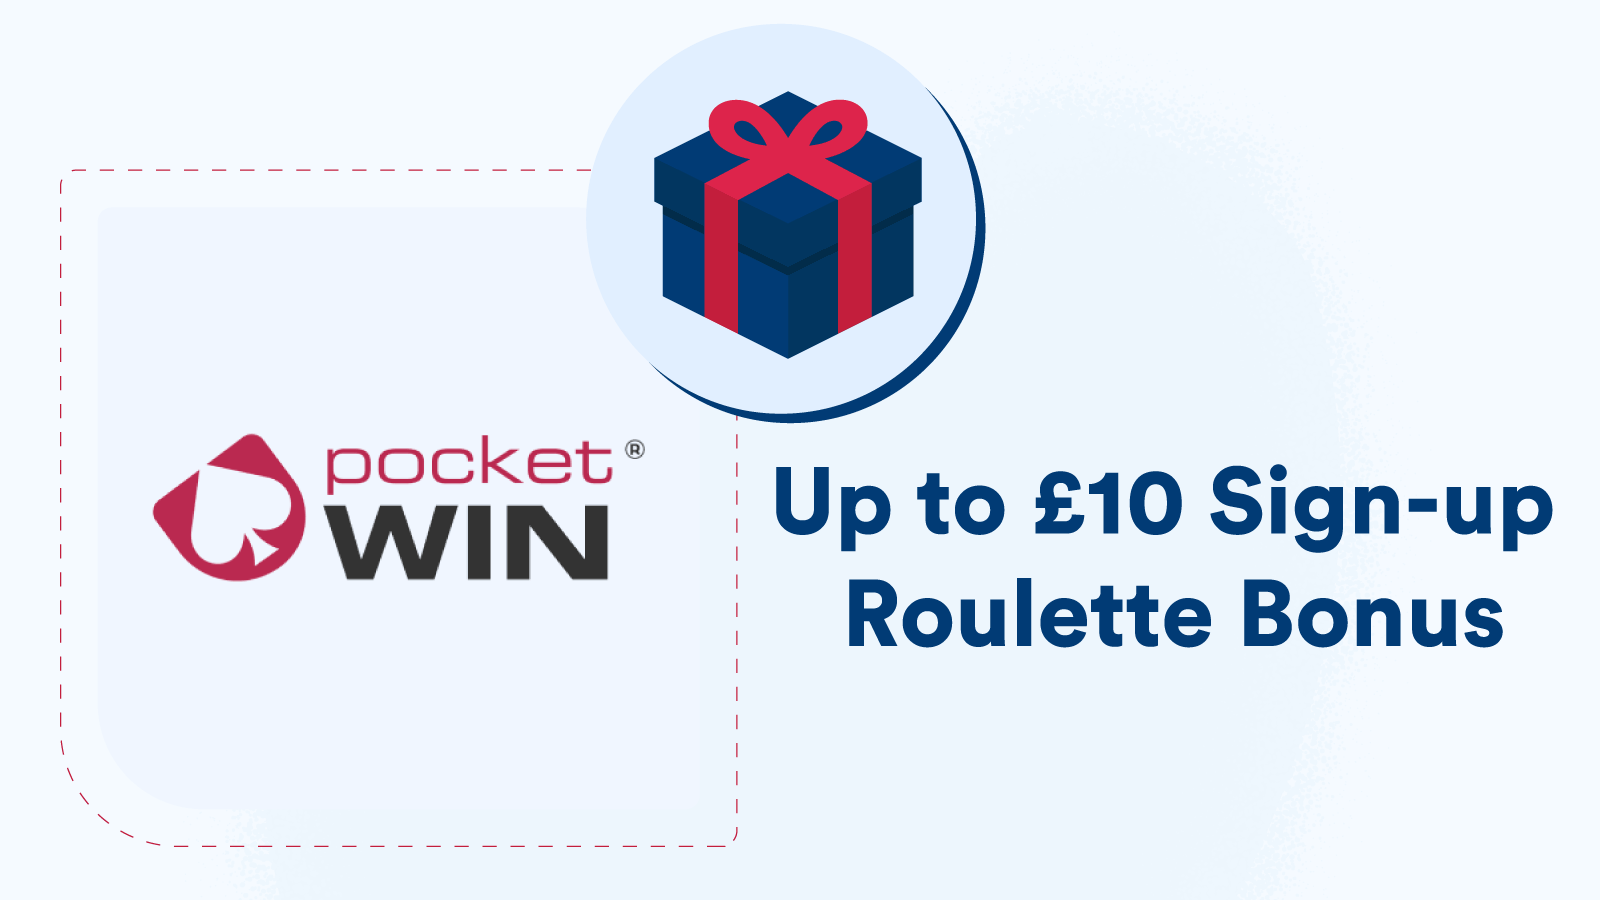 Up to ¥10 Sign-up Roulette Bonus at PocketWin